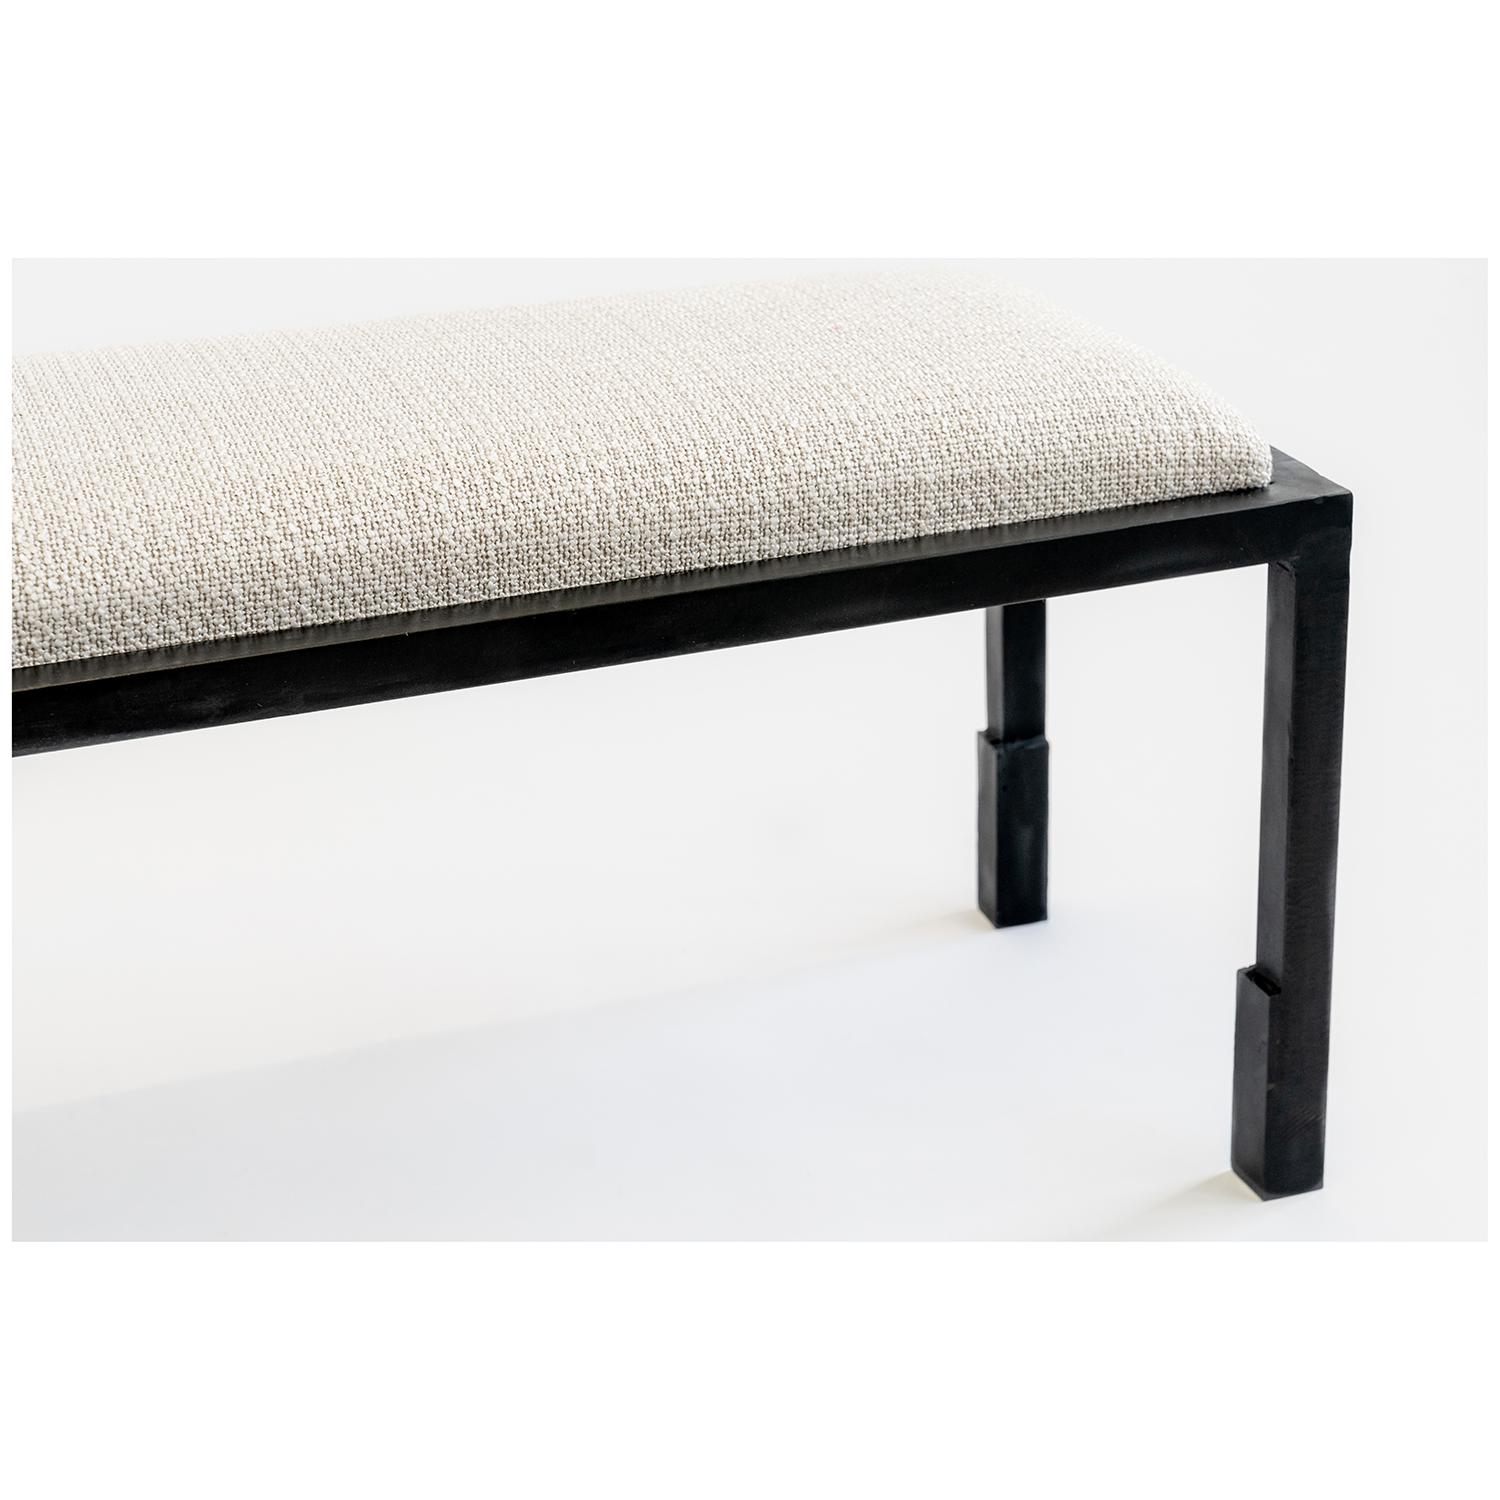 BENCH NO. 1
J.M. Szymanski 
d. 2020

Beautifully designed textiles and blackened steel are combined to bring elegance to the simplicity in this design. 

Pricing based on COM. Custom sizes available.

Our products are fabricated and finished by